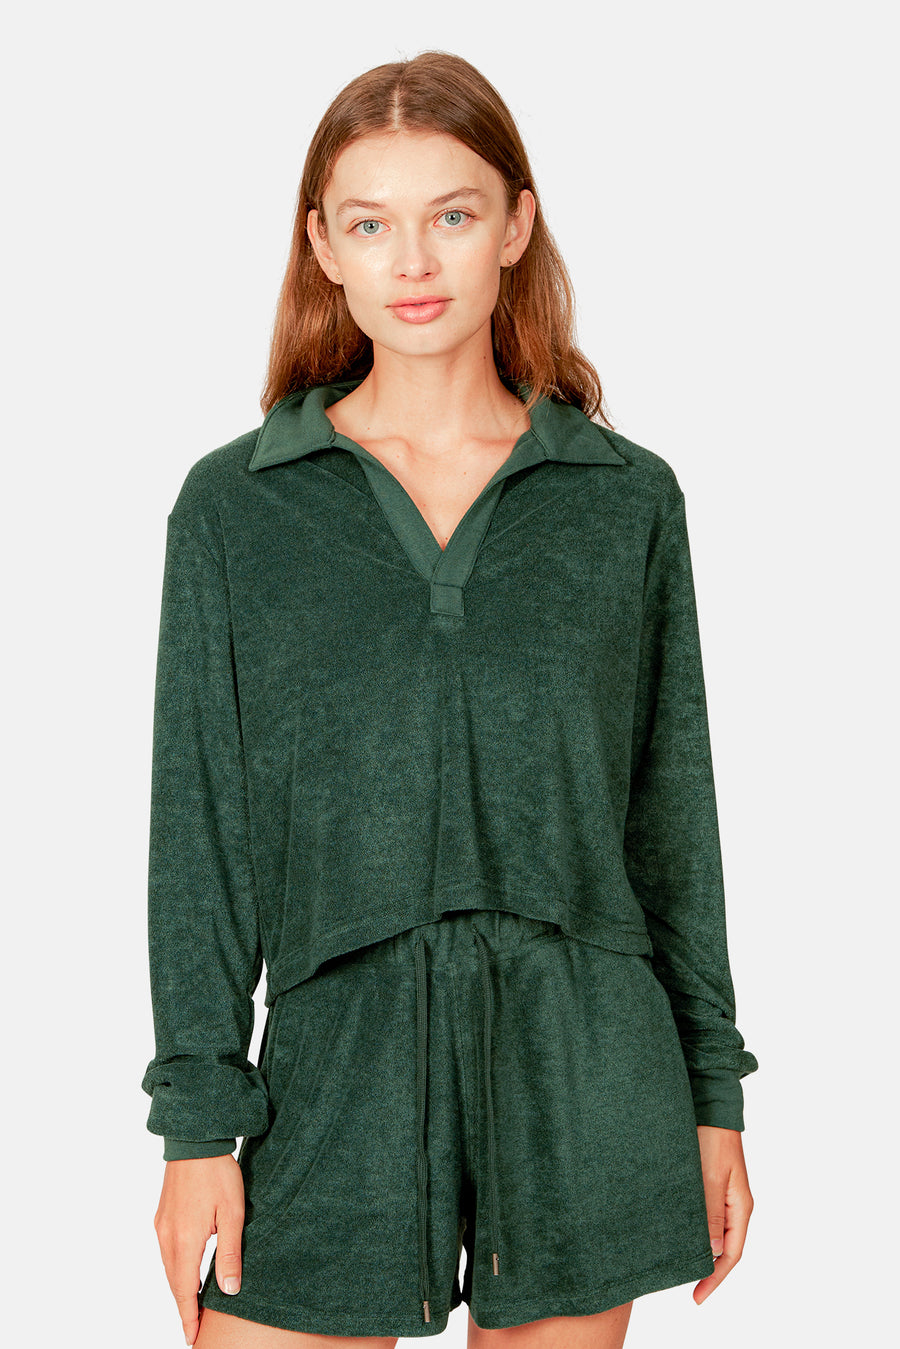 Charlie Cropped Long Sleeve Polo Forest Green - blueandcream